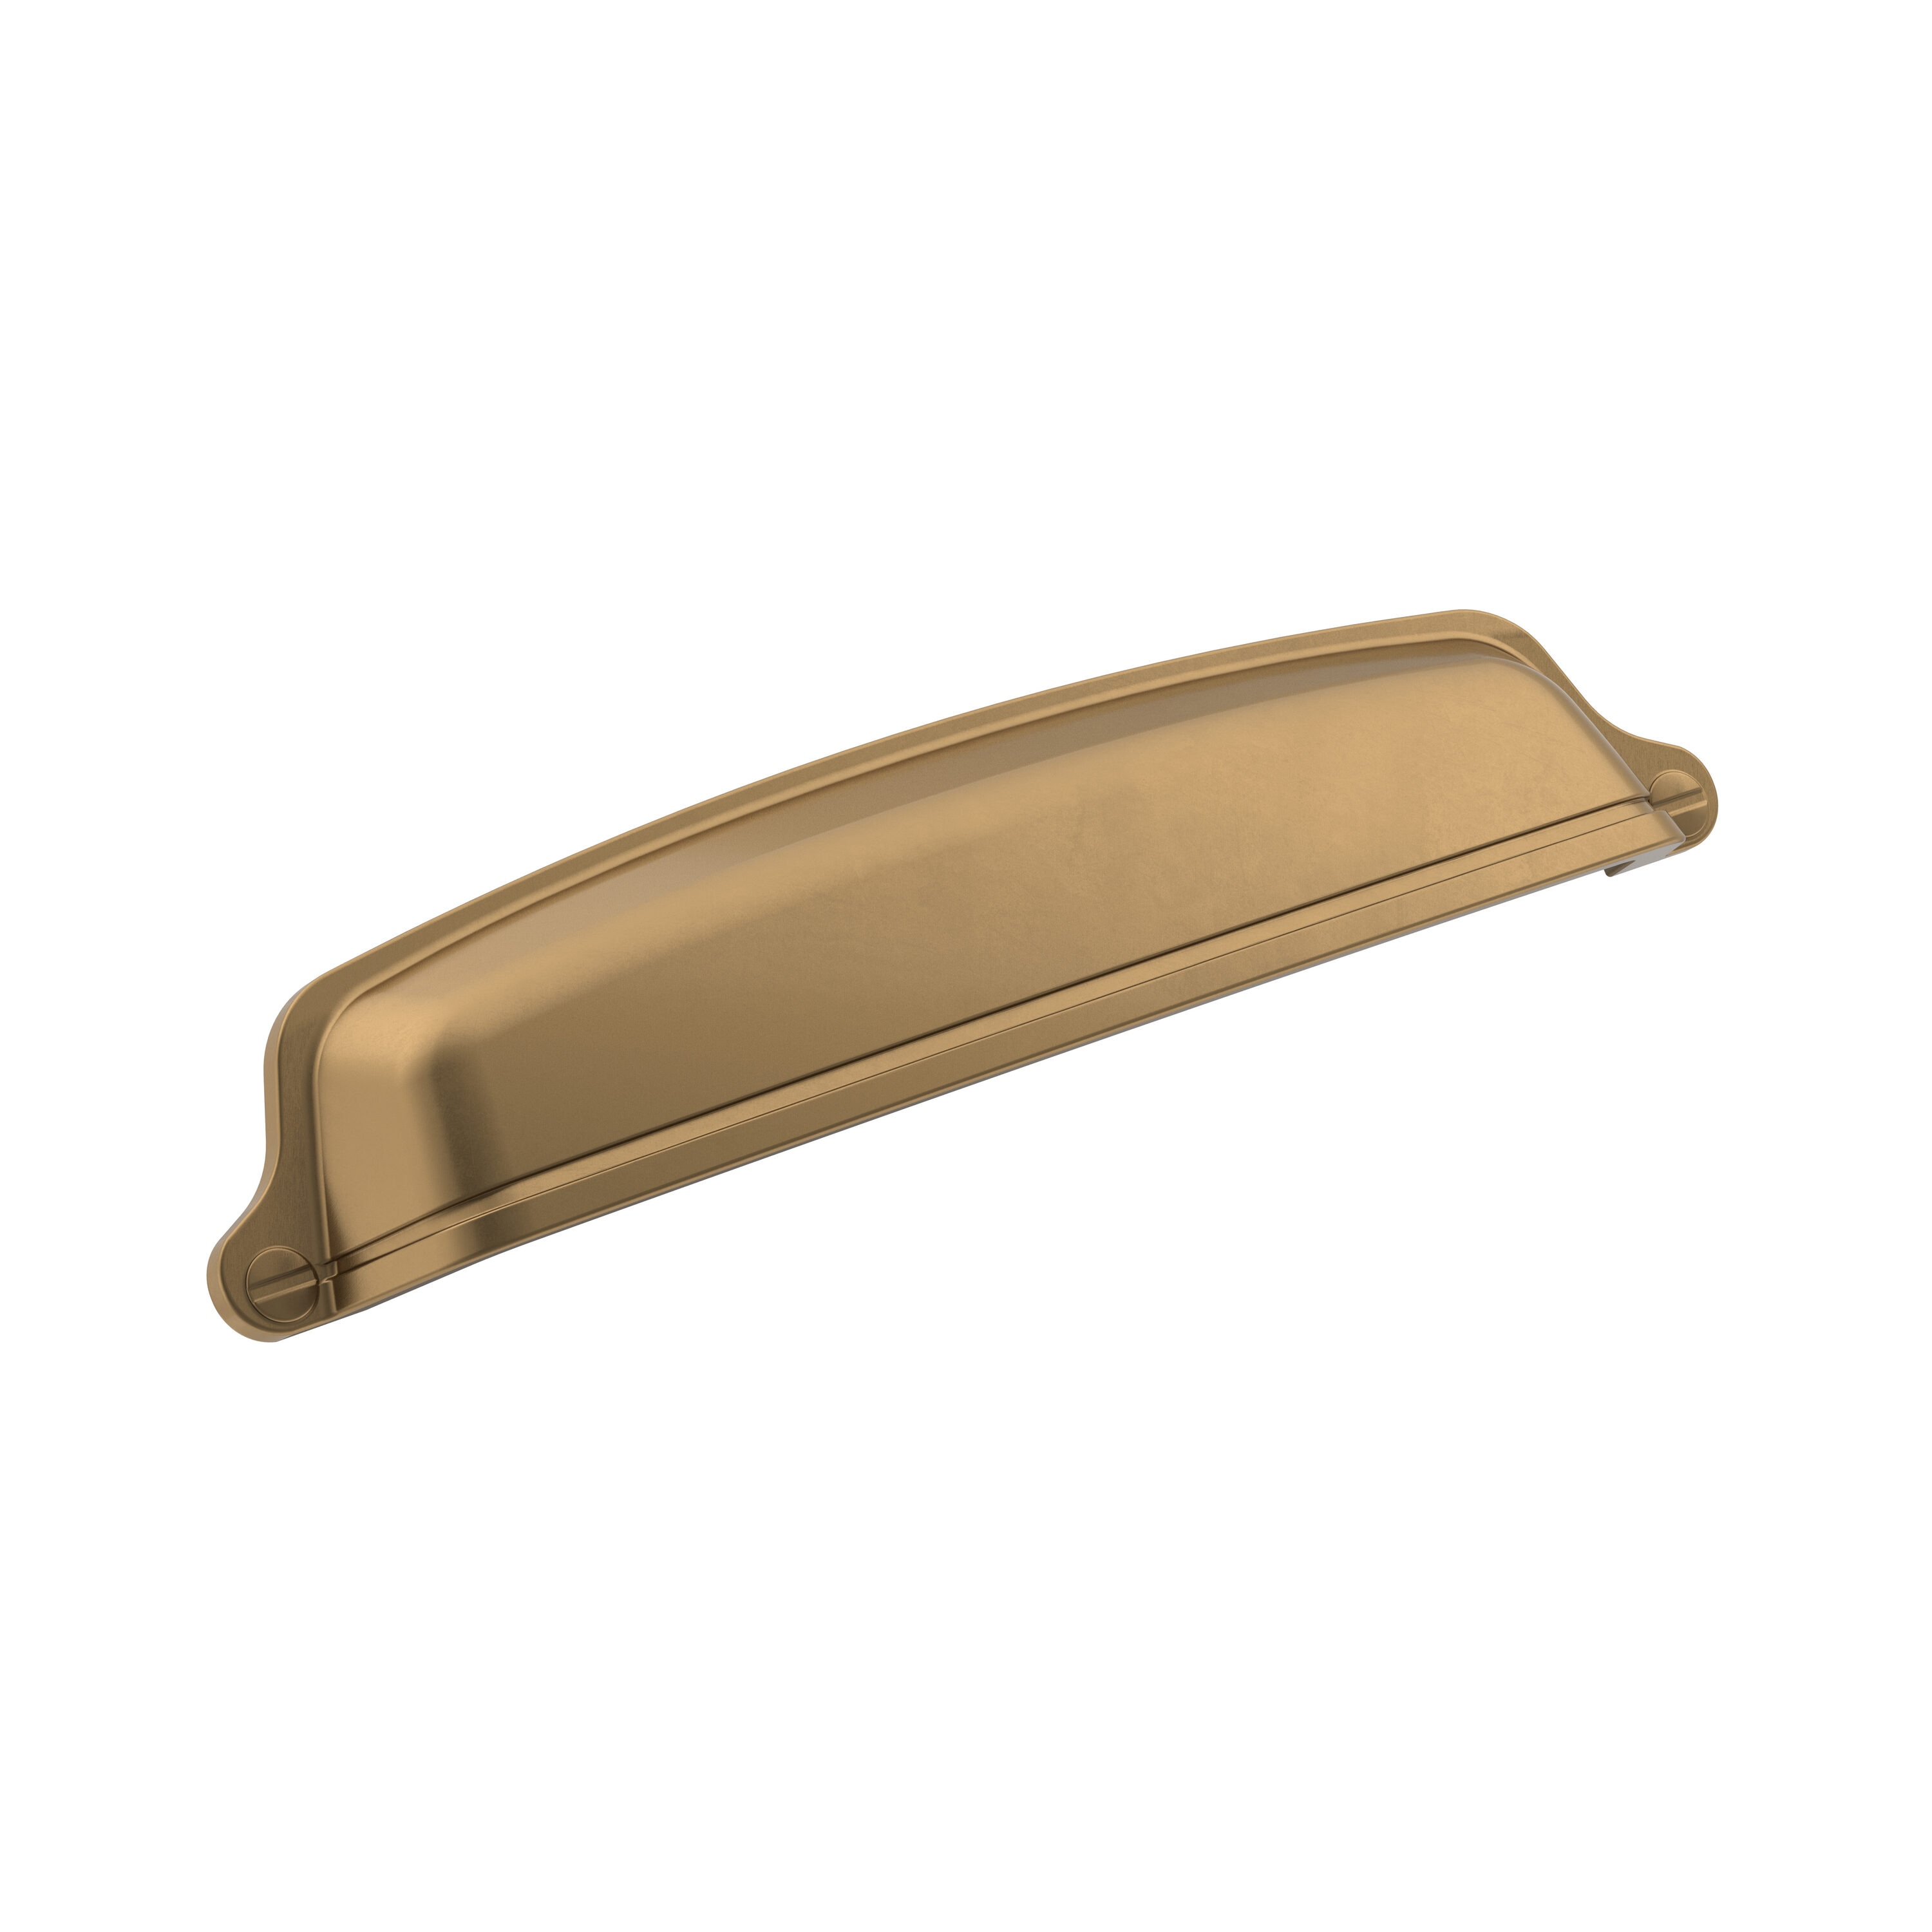 Quality Brass Cup Pull 4 Handles. All Hardware is One Colour. Mix